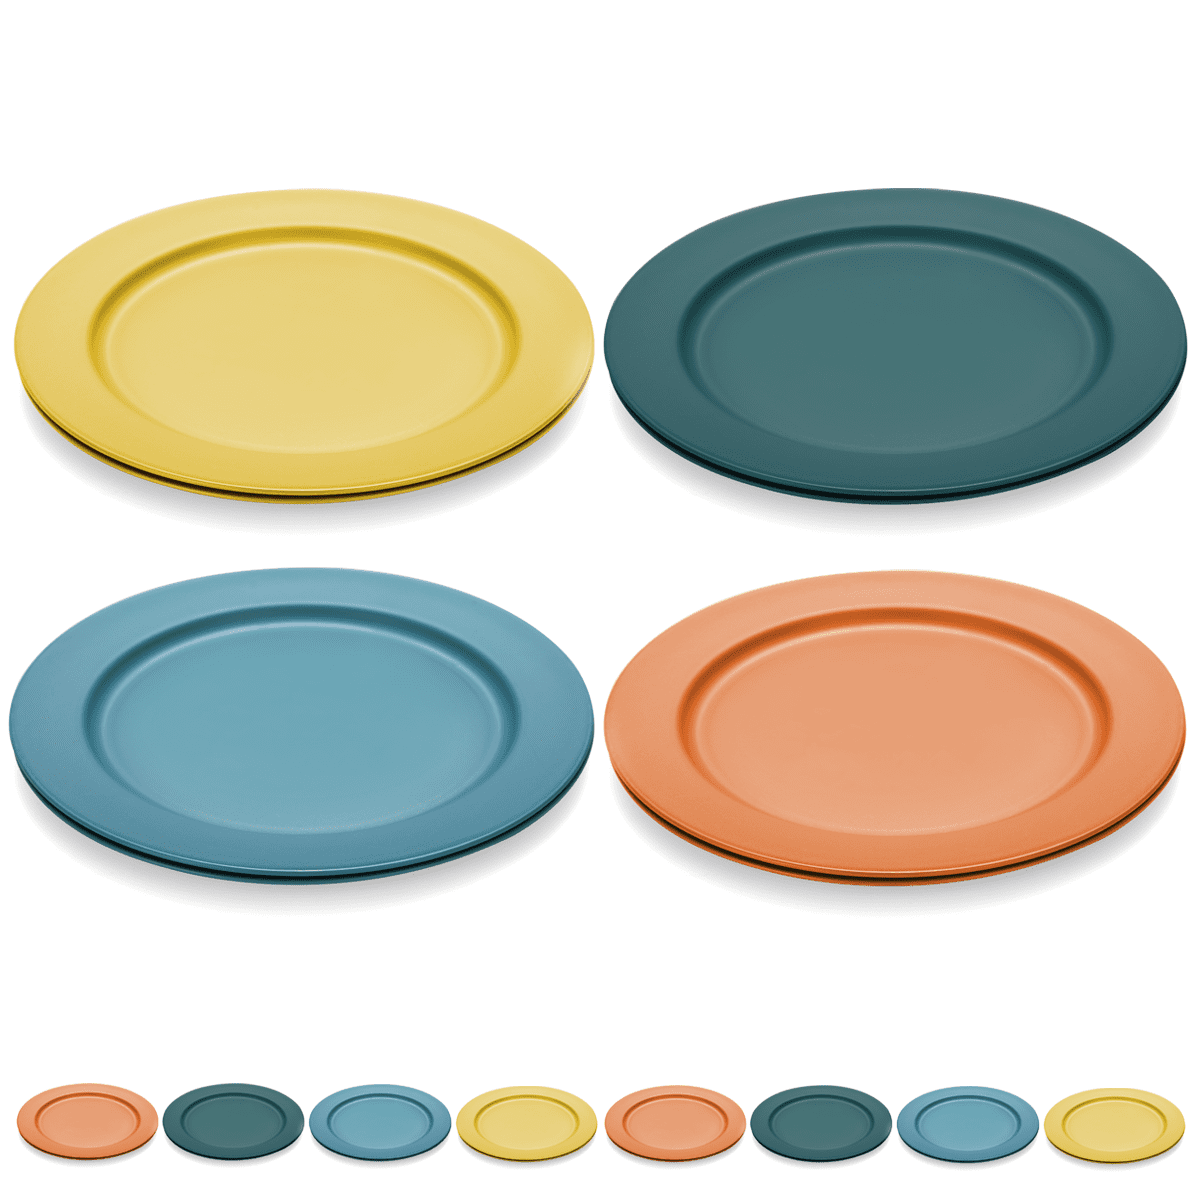 ReaNea 10 Inch Large Plastic Plates 8 Pieces, Unbreakable And Reusable  Light Weight Dinner Plates Microwave Safe BPA Free